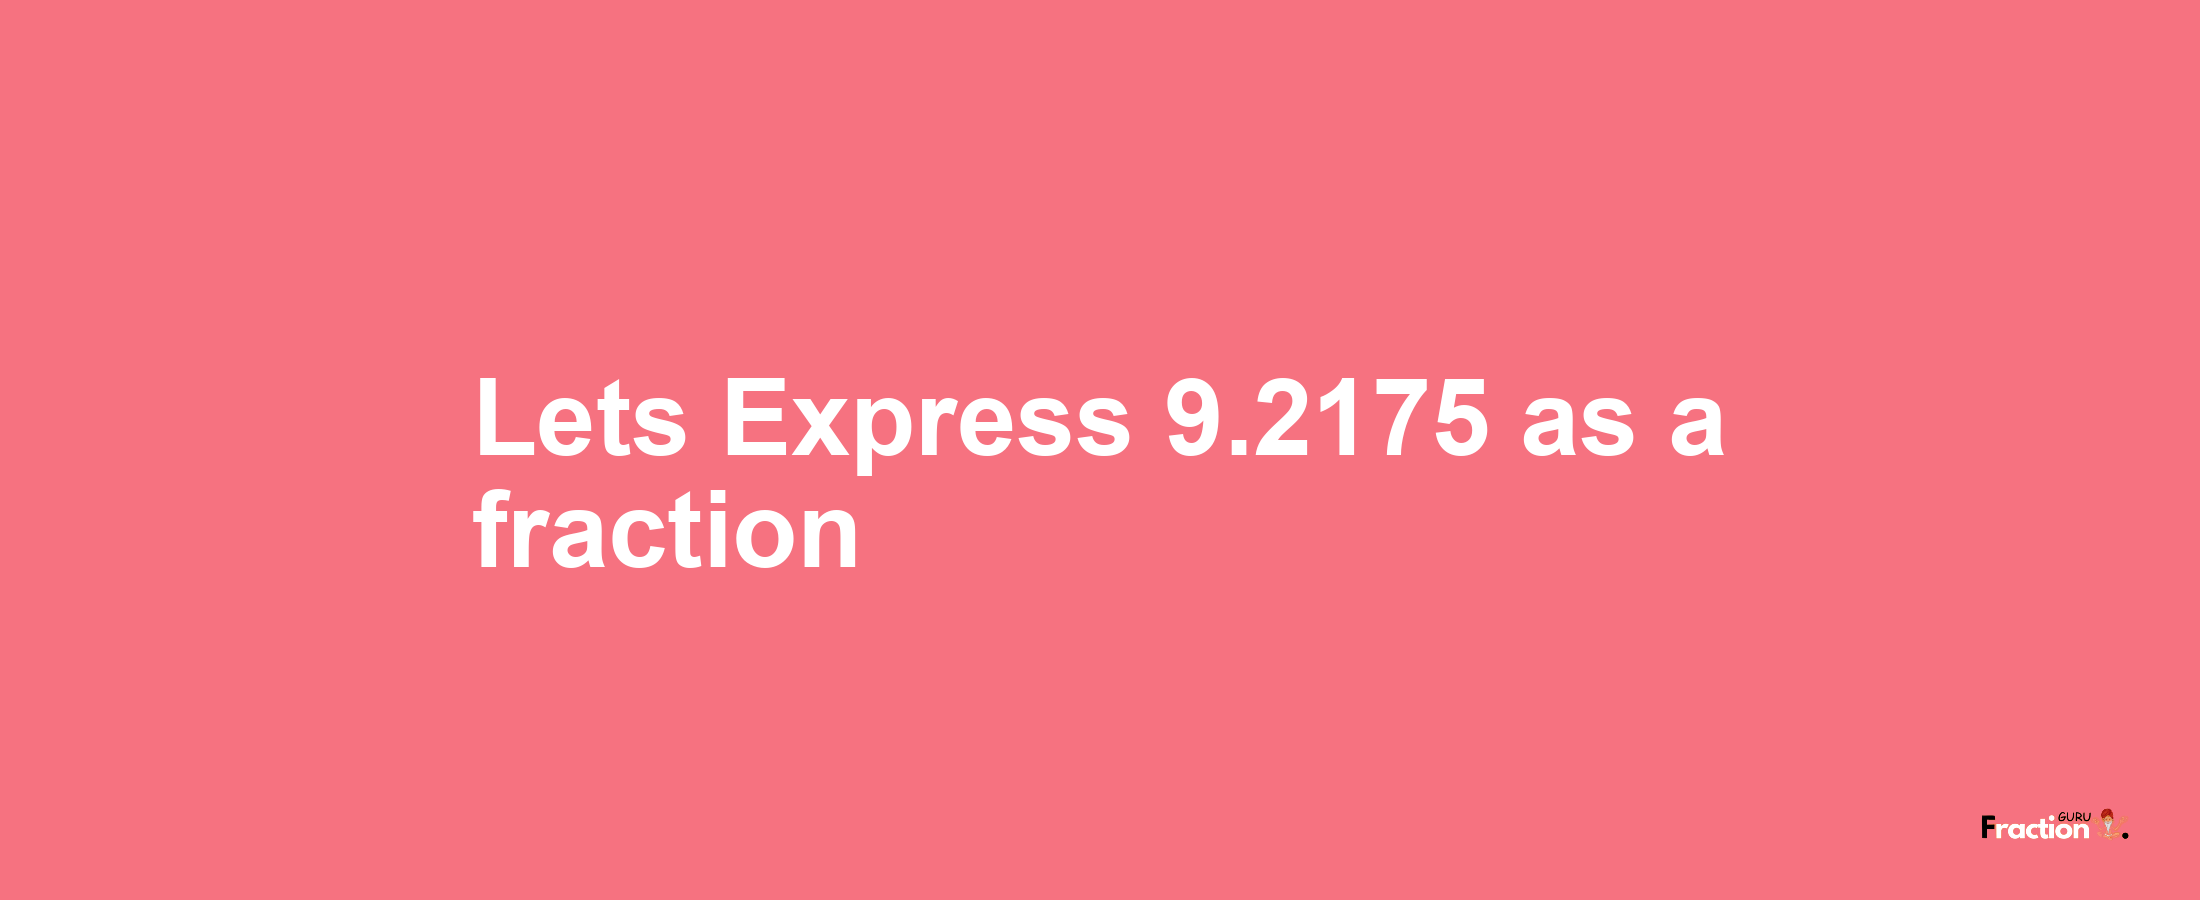 Lets Express 9.2175 as afraction